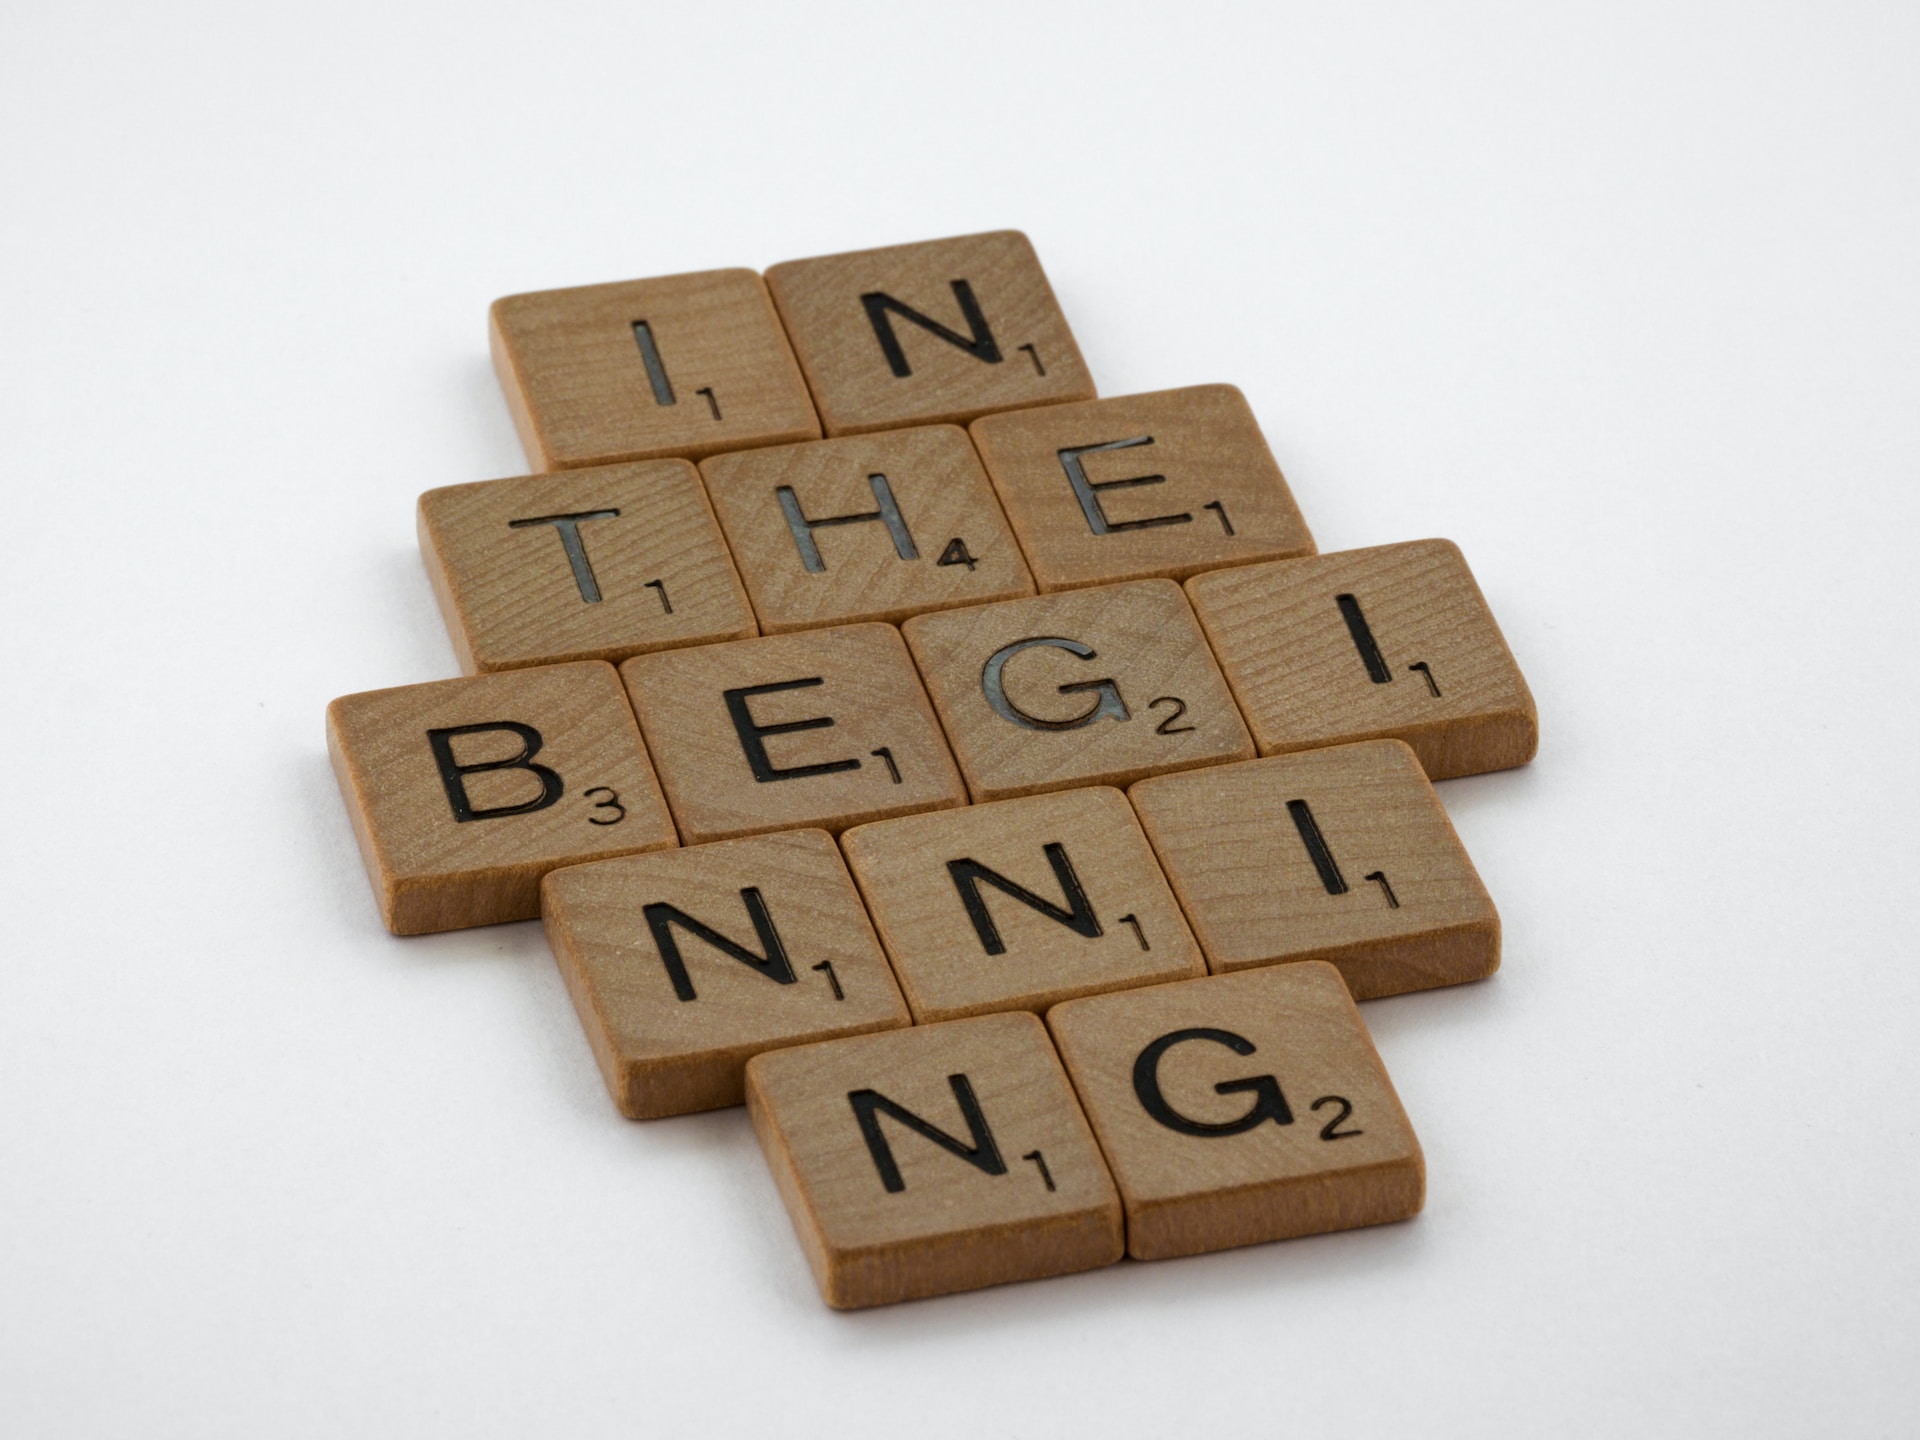 "In the Beginning" with Scrabble tiles